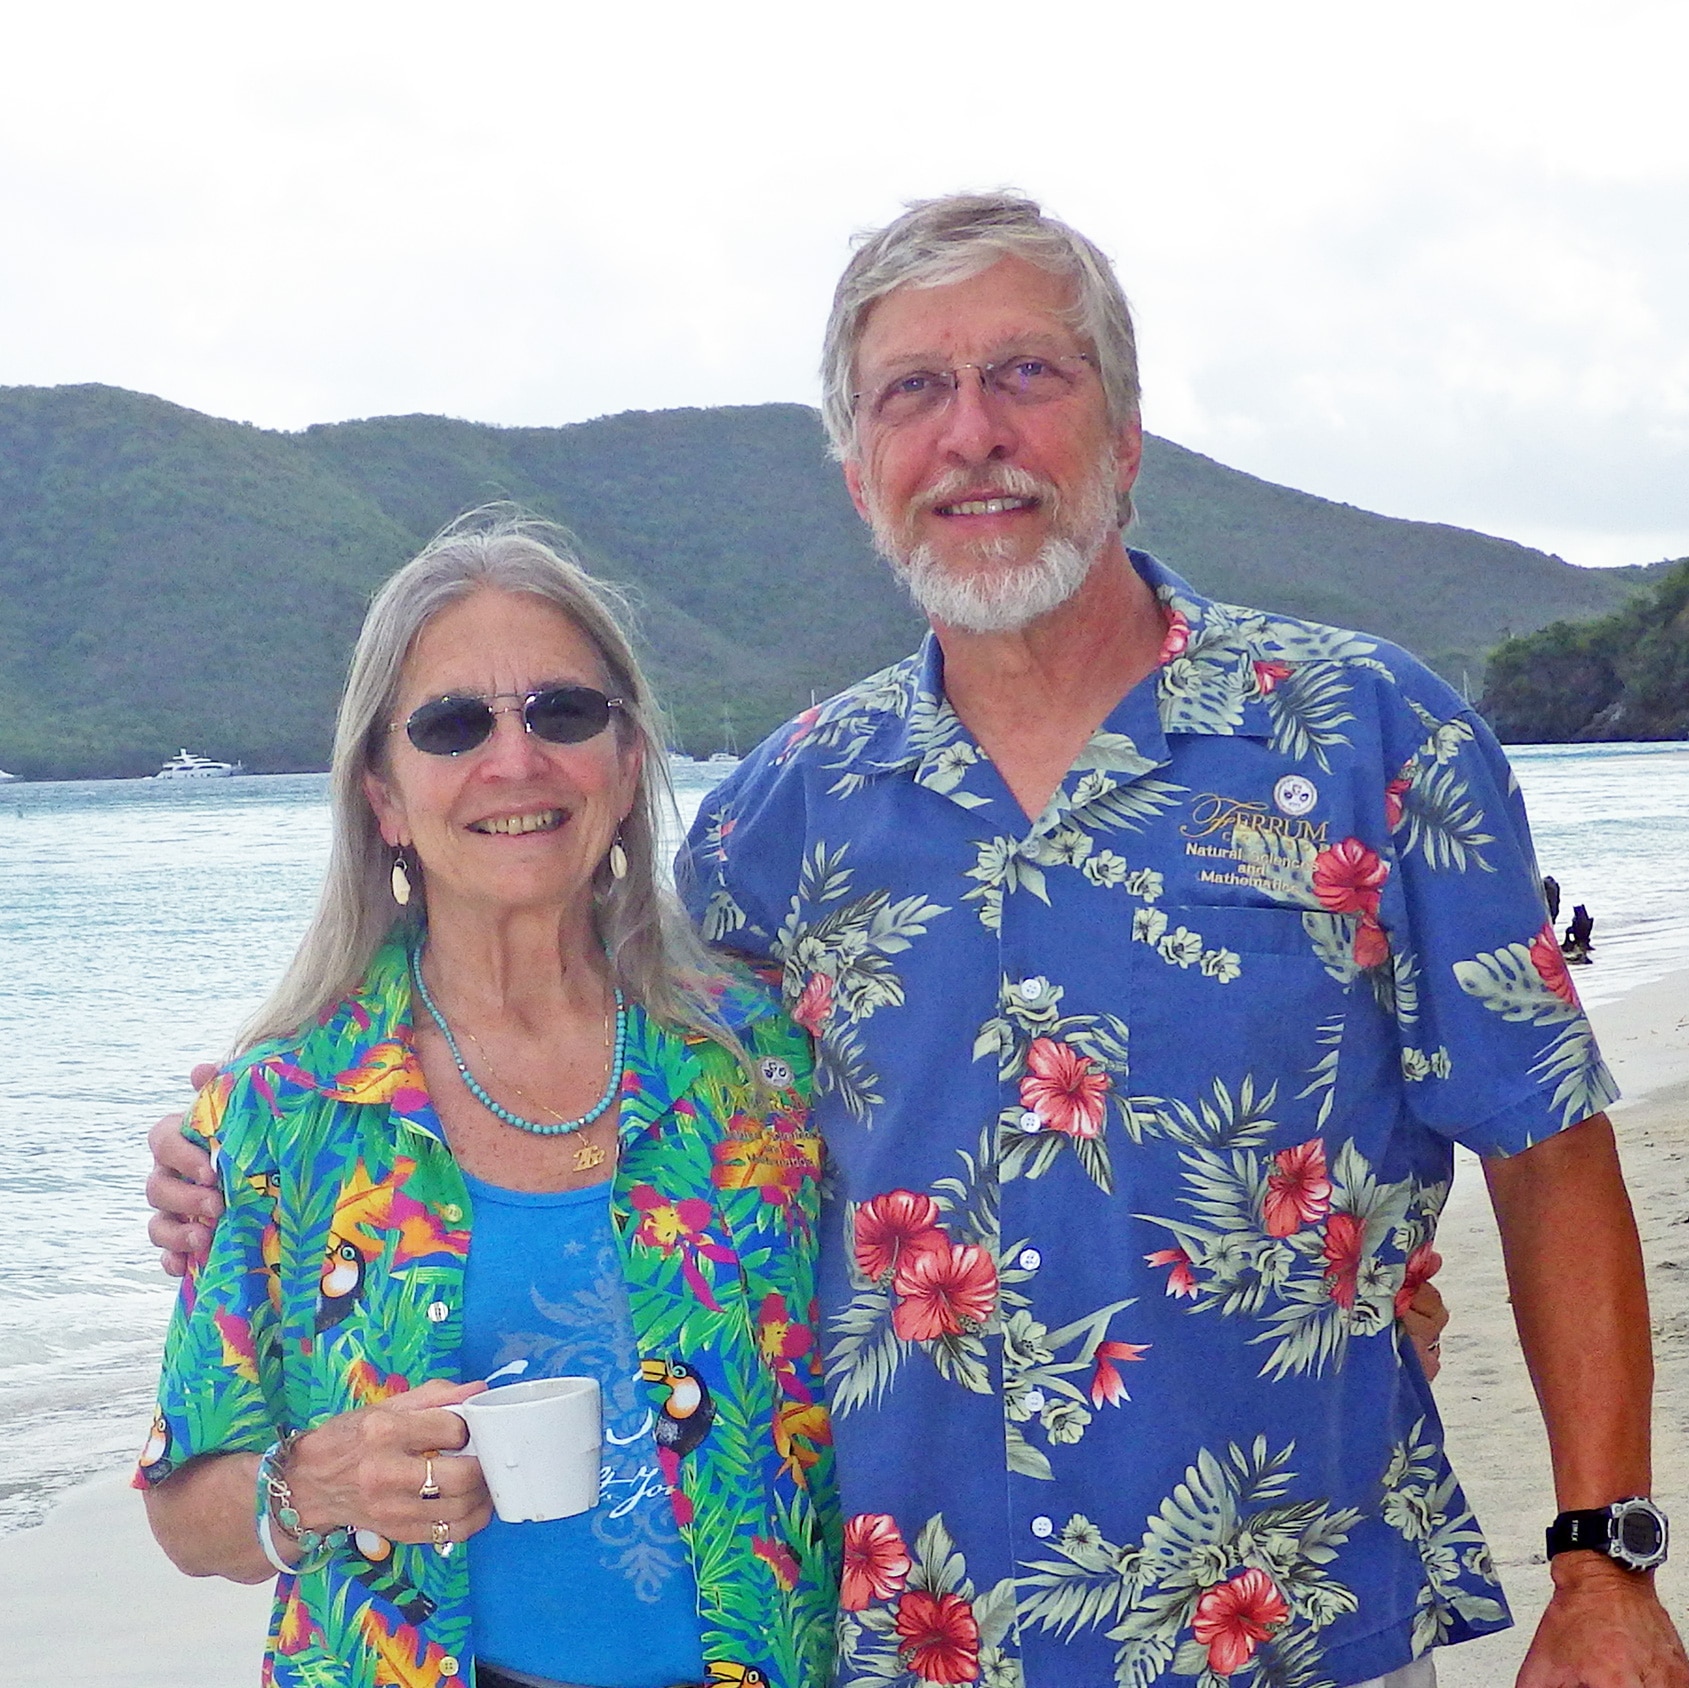 Drs. Carolyn Thomas and Bob Pohlad stand on St. John beach, Virgin Islands, in 2013.